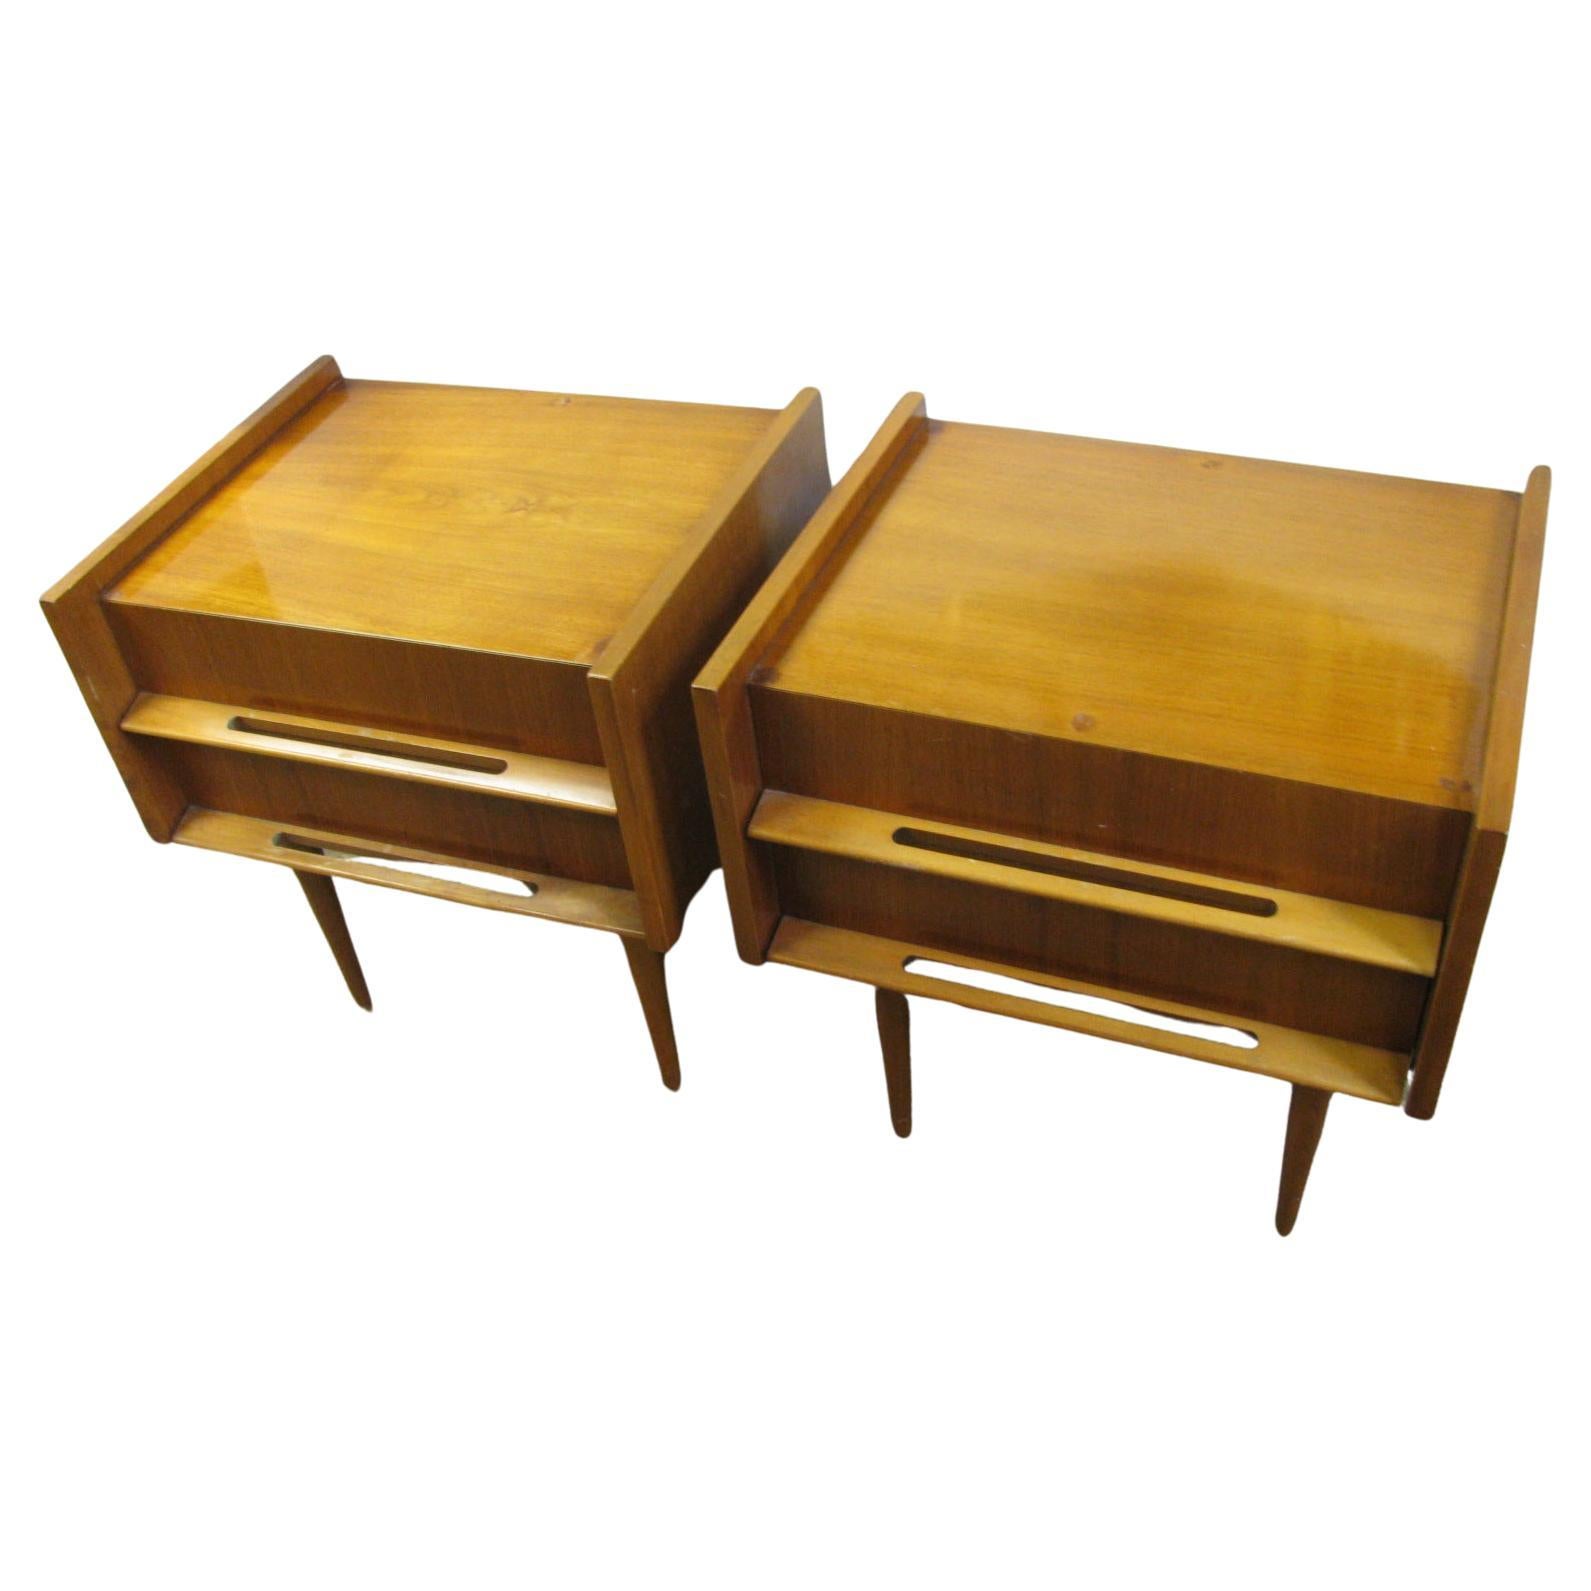 Swedish Pair of Edmond Spence Mid-Century Modern Night Tables, Made in Sweden For Sale